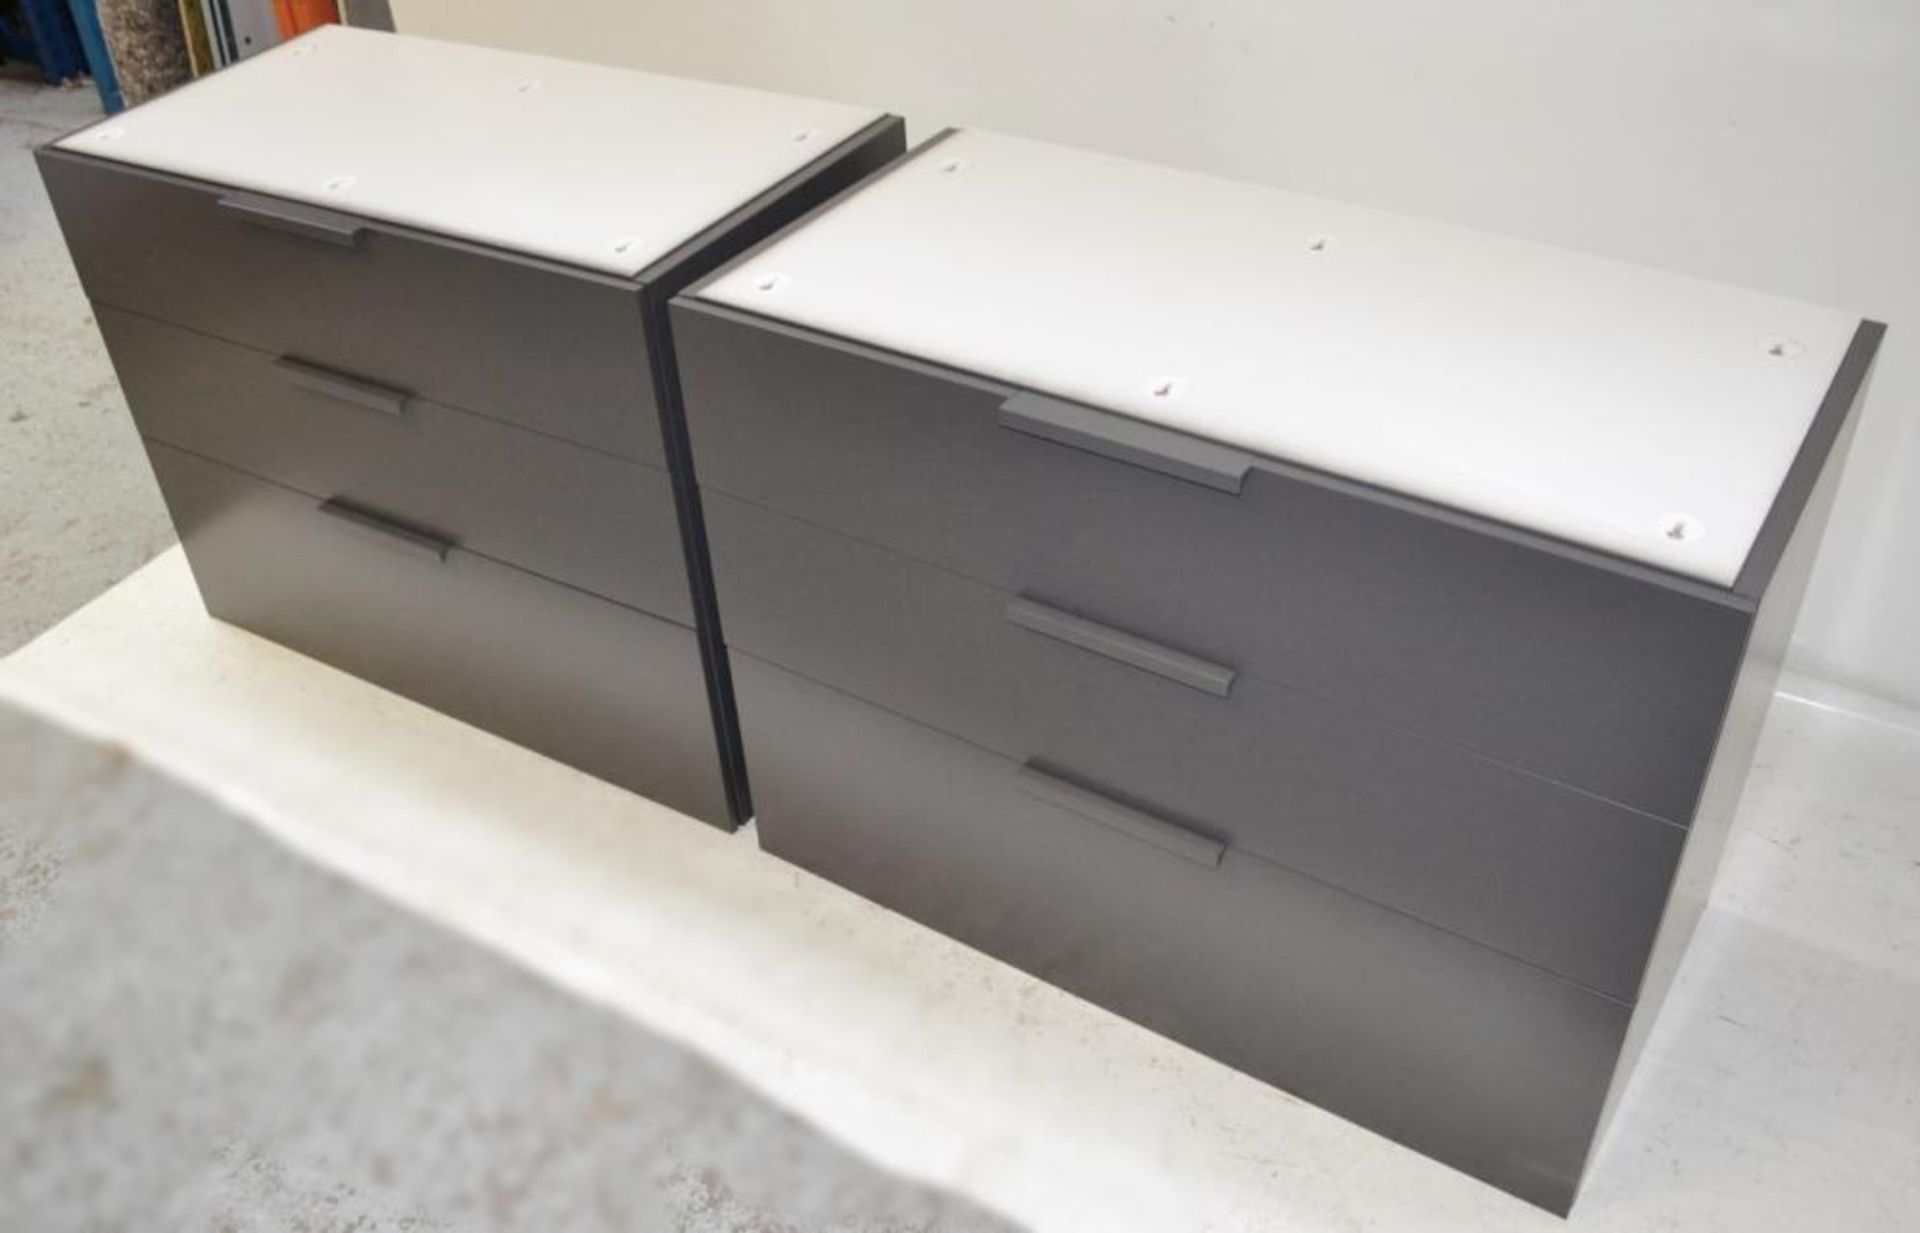 A Pair Of LIGNE ROSET 'Everywhere' 3-Drawer Soft-Close Chests In Dark Grey - Ref: 5927125 NP1/19 - C - Image 2 of 4